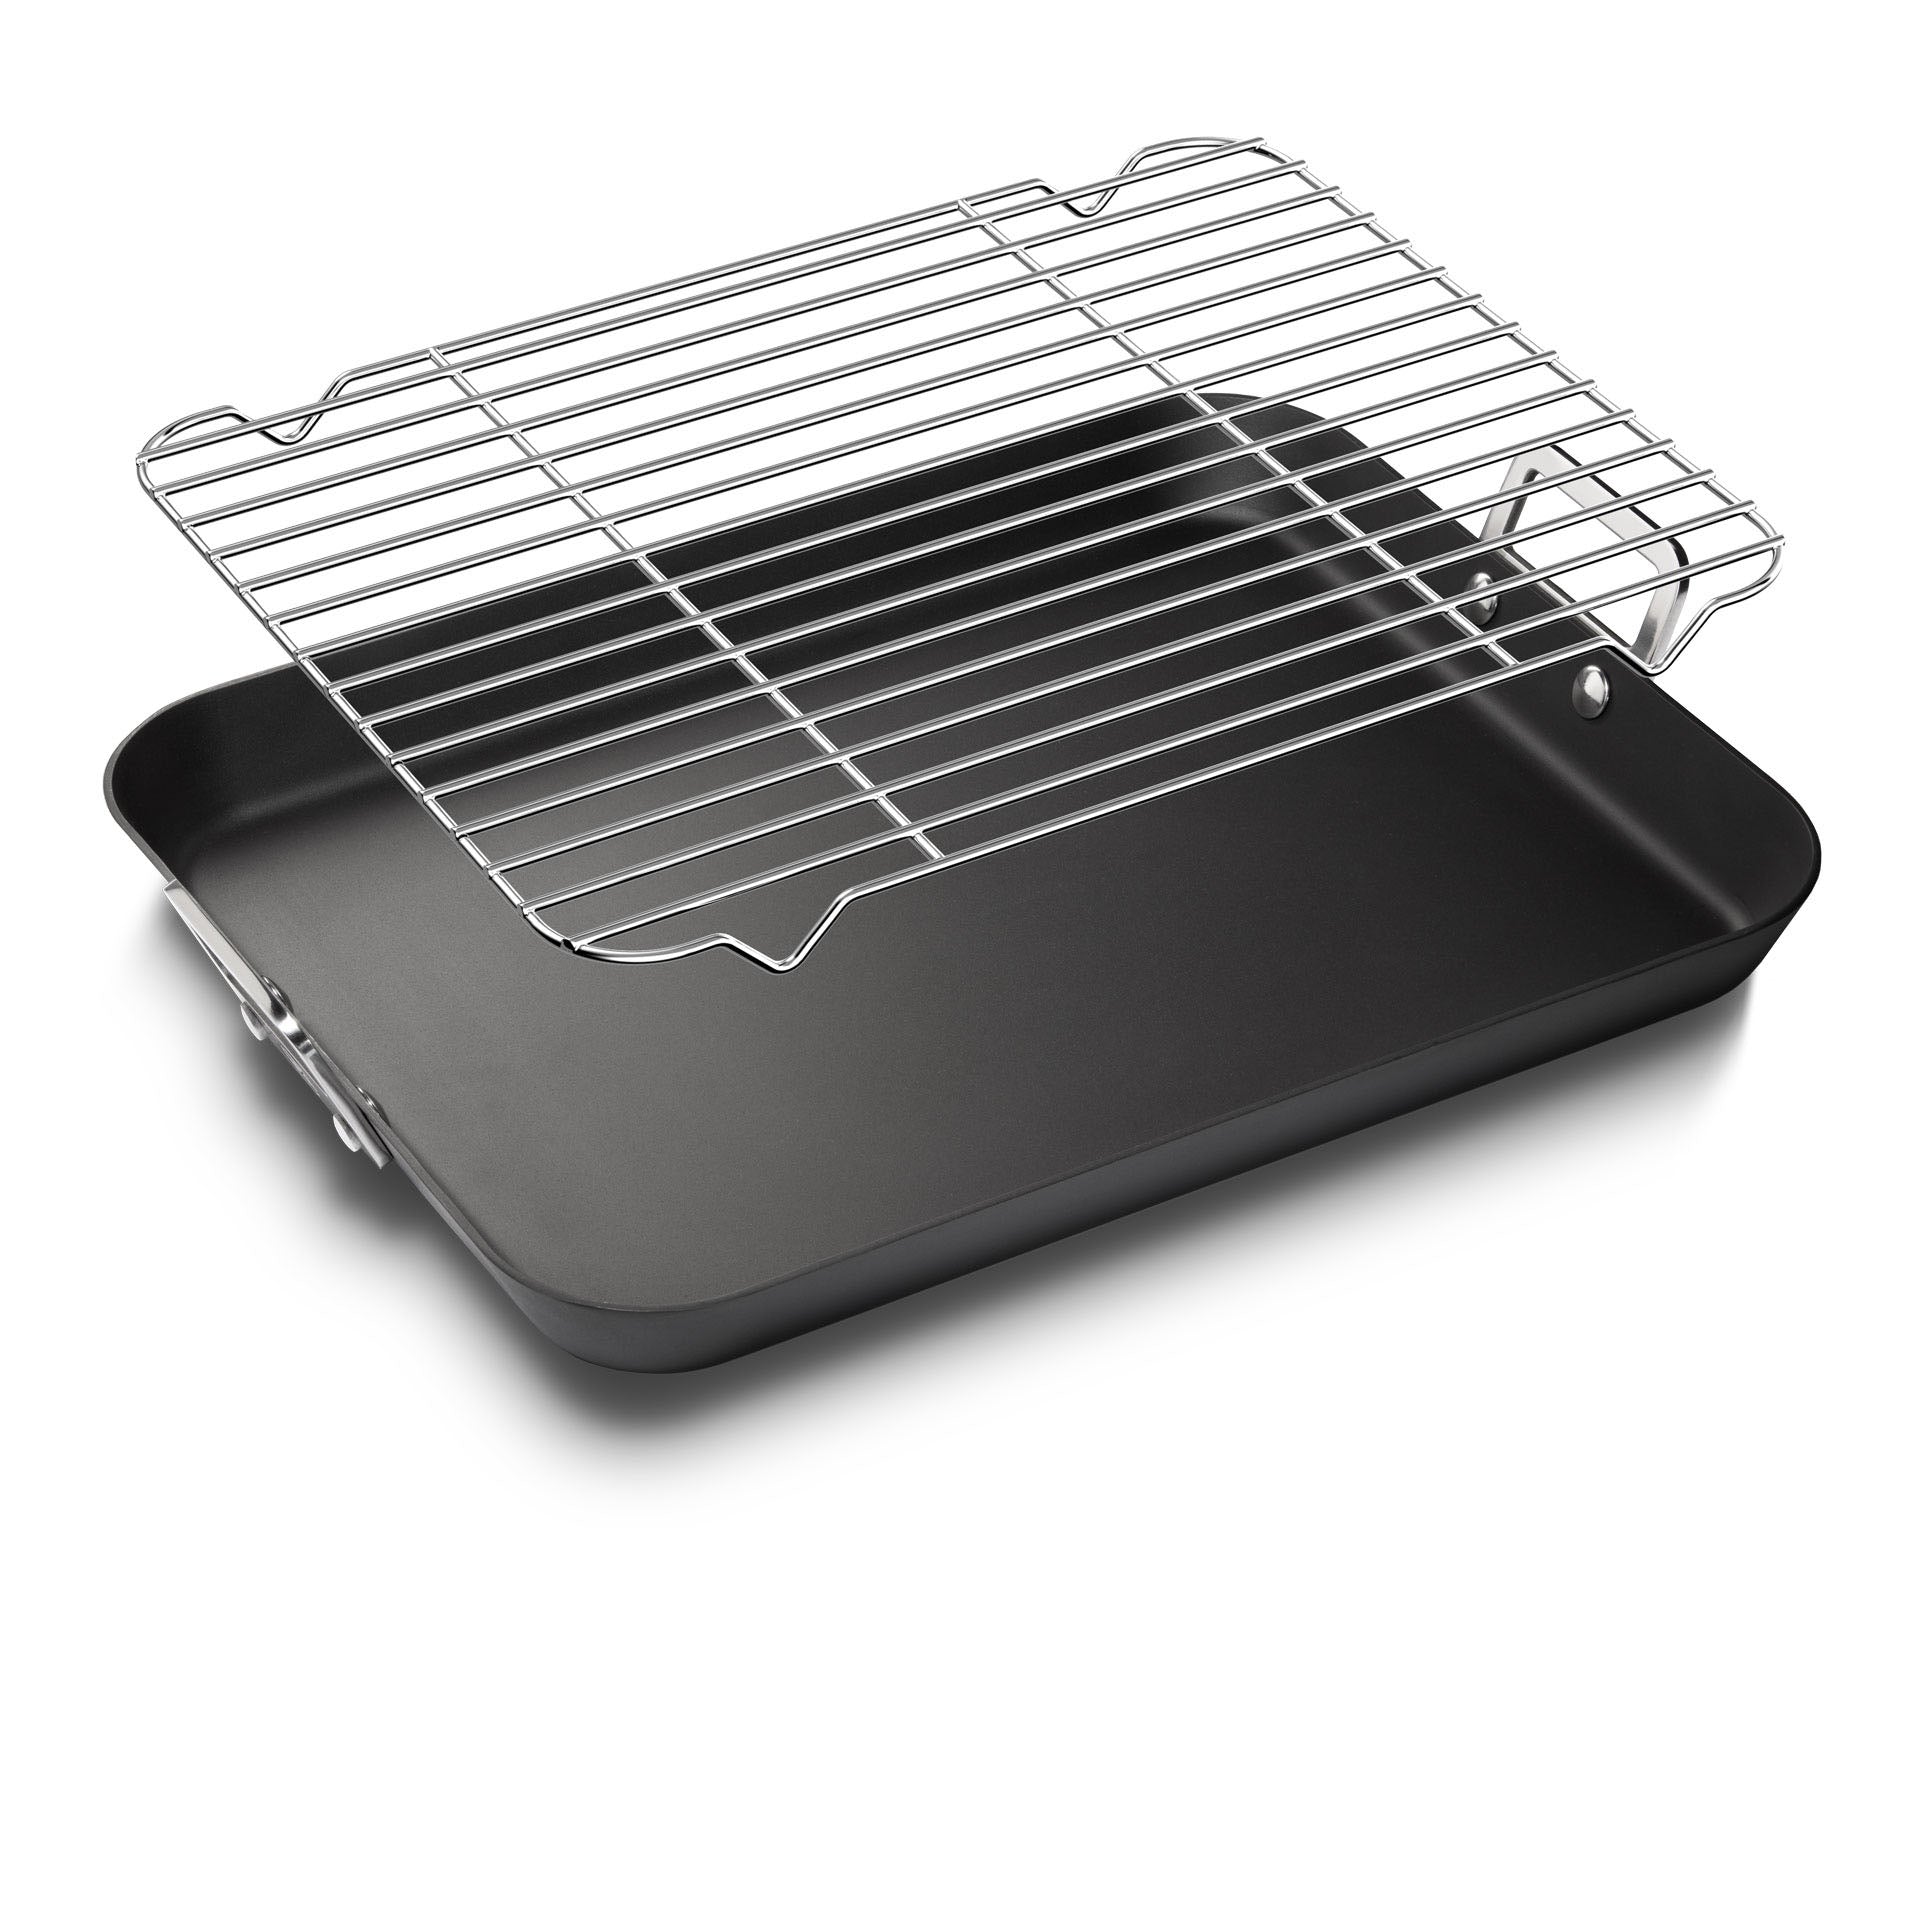 Carbon Steel Roasting Tray